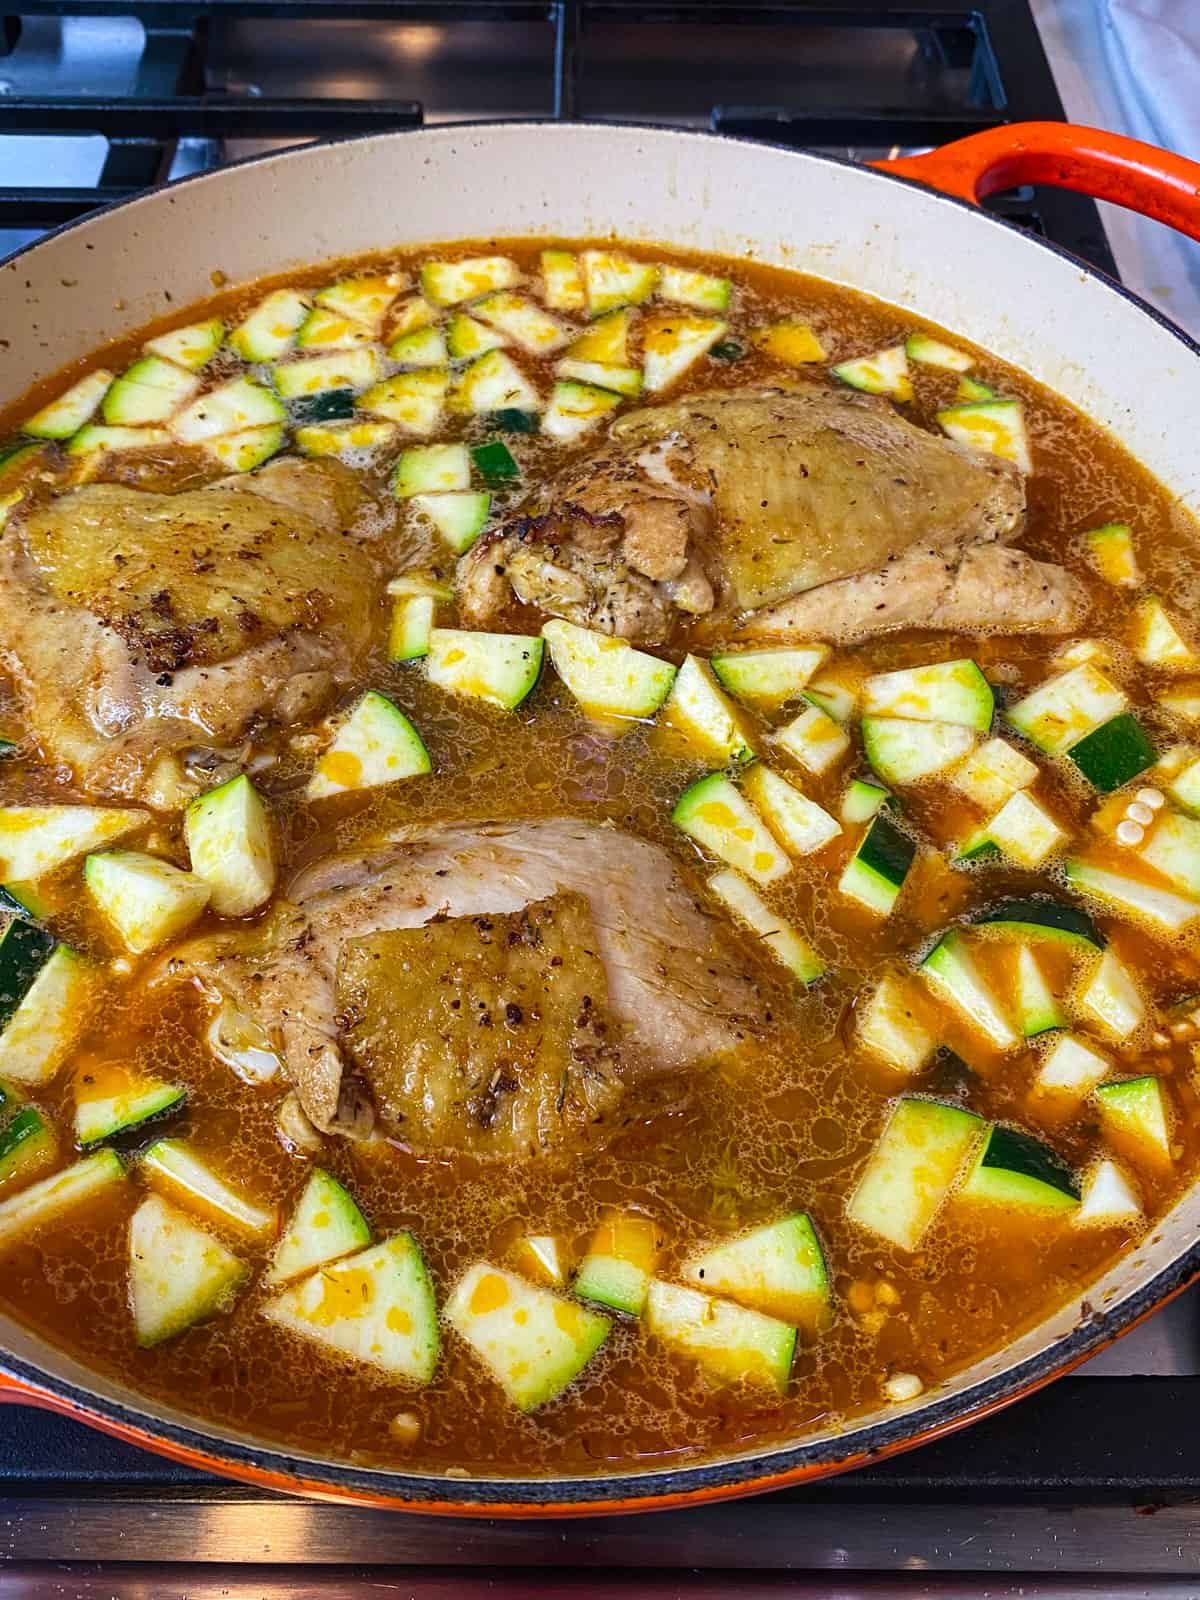 Add the seared chicken back into the broth with the pearl couscous and zucchini.